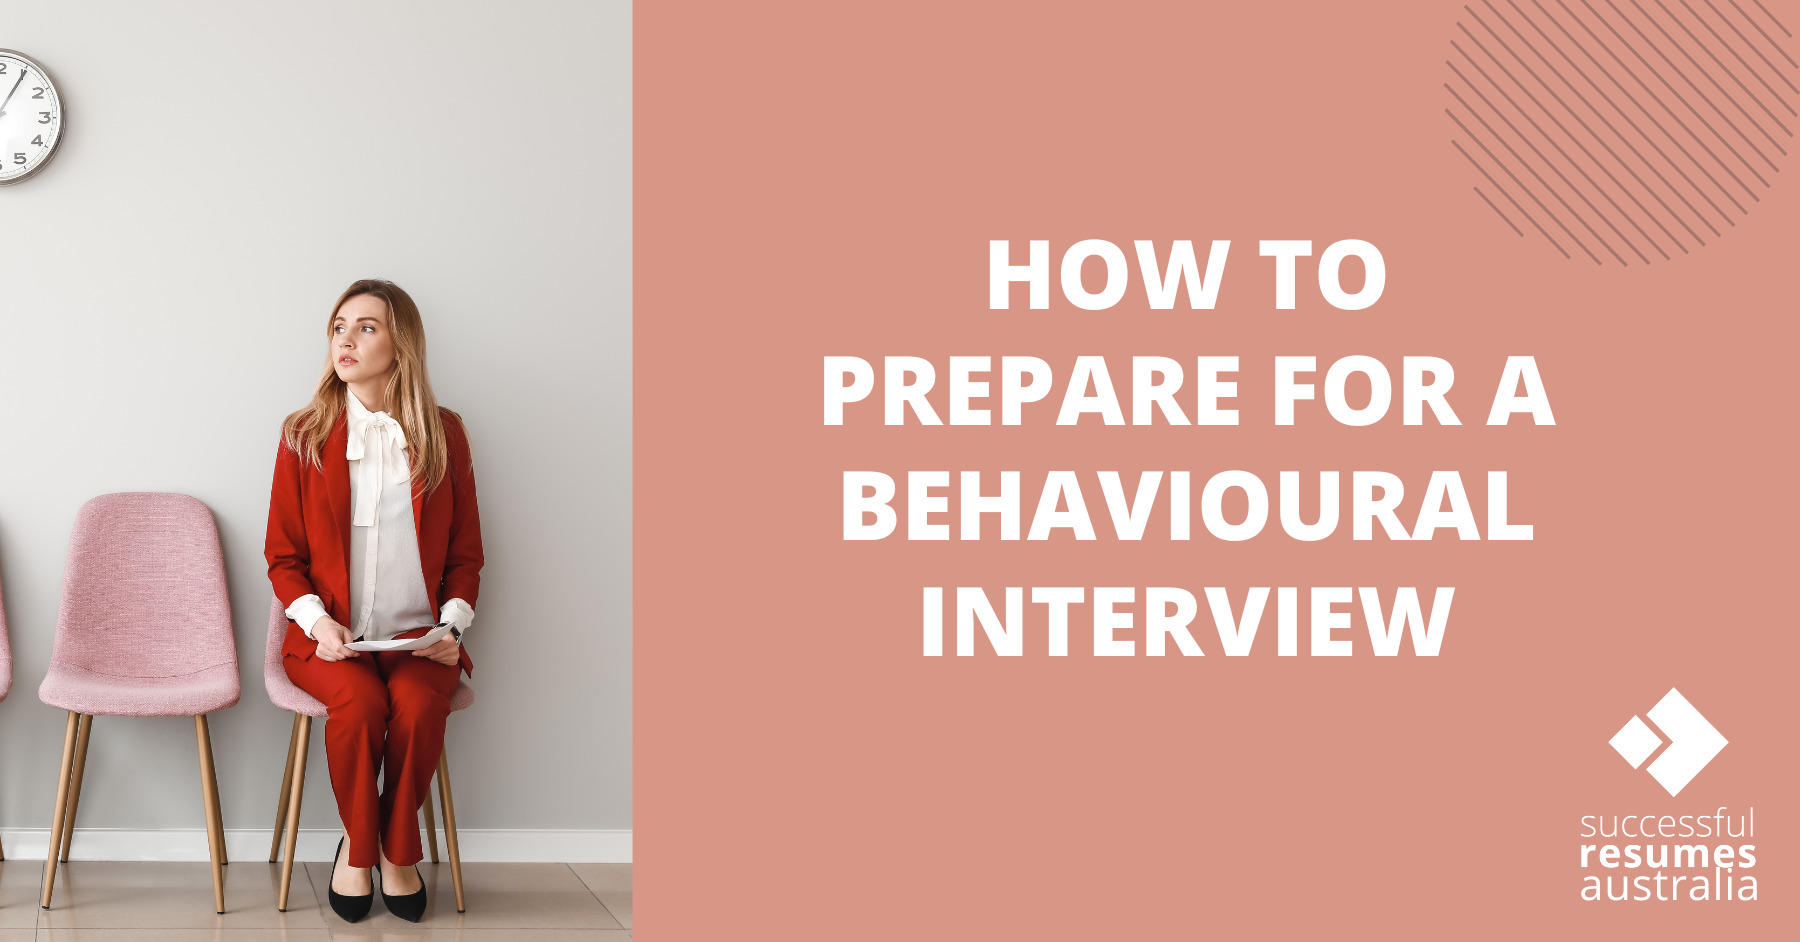 How to Prepare for a Behavioural Interview